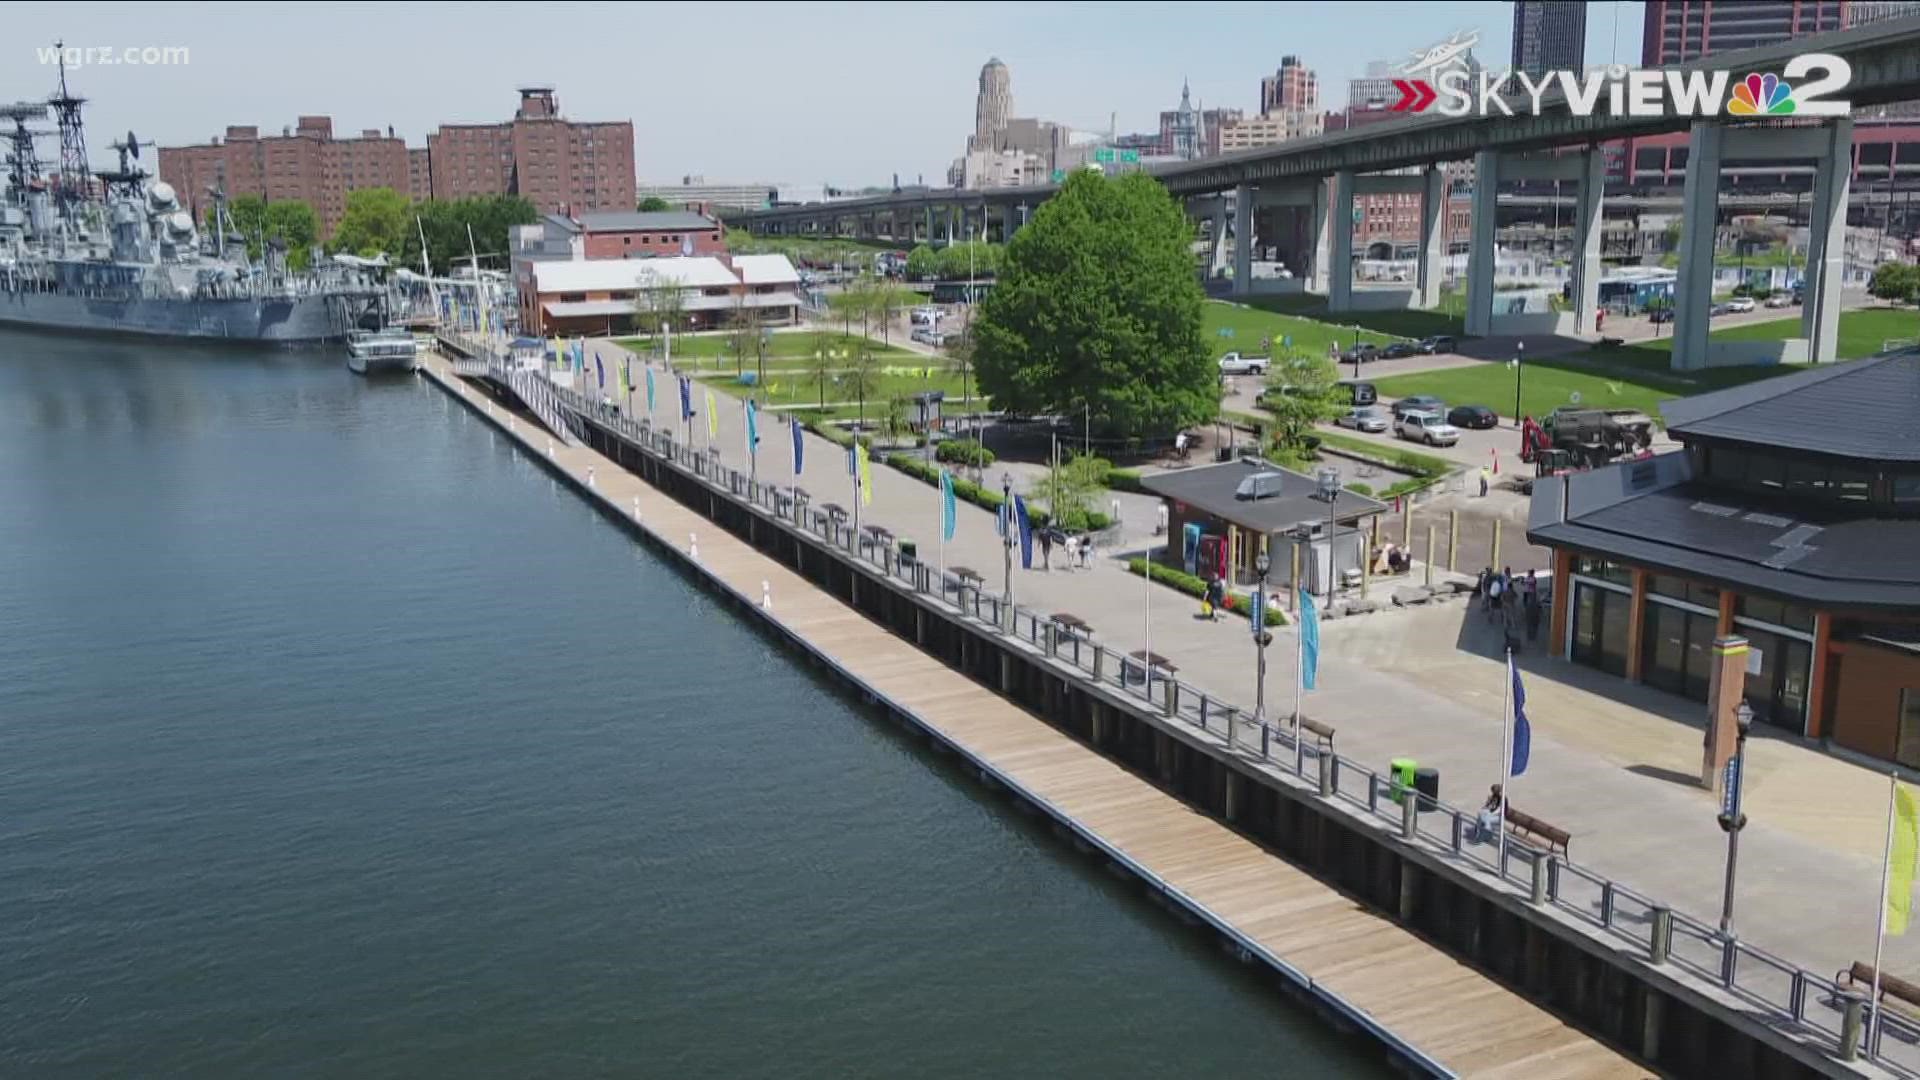 It's happening at Canalside Saturday from 2 p.m. to 6 p.m. and will feature 45 craft breweries from around New York State.